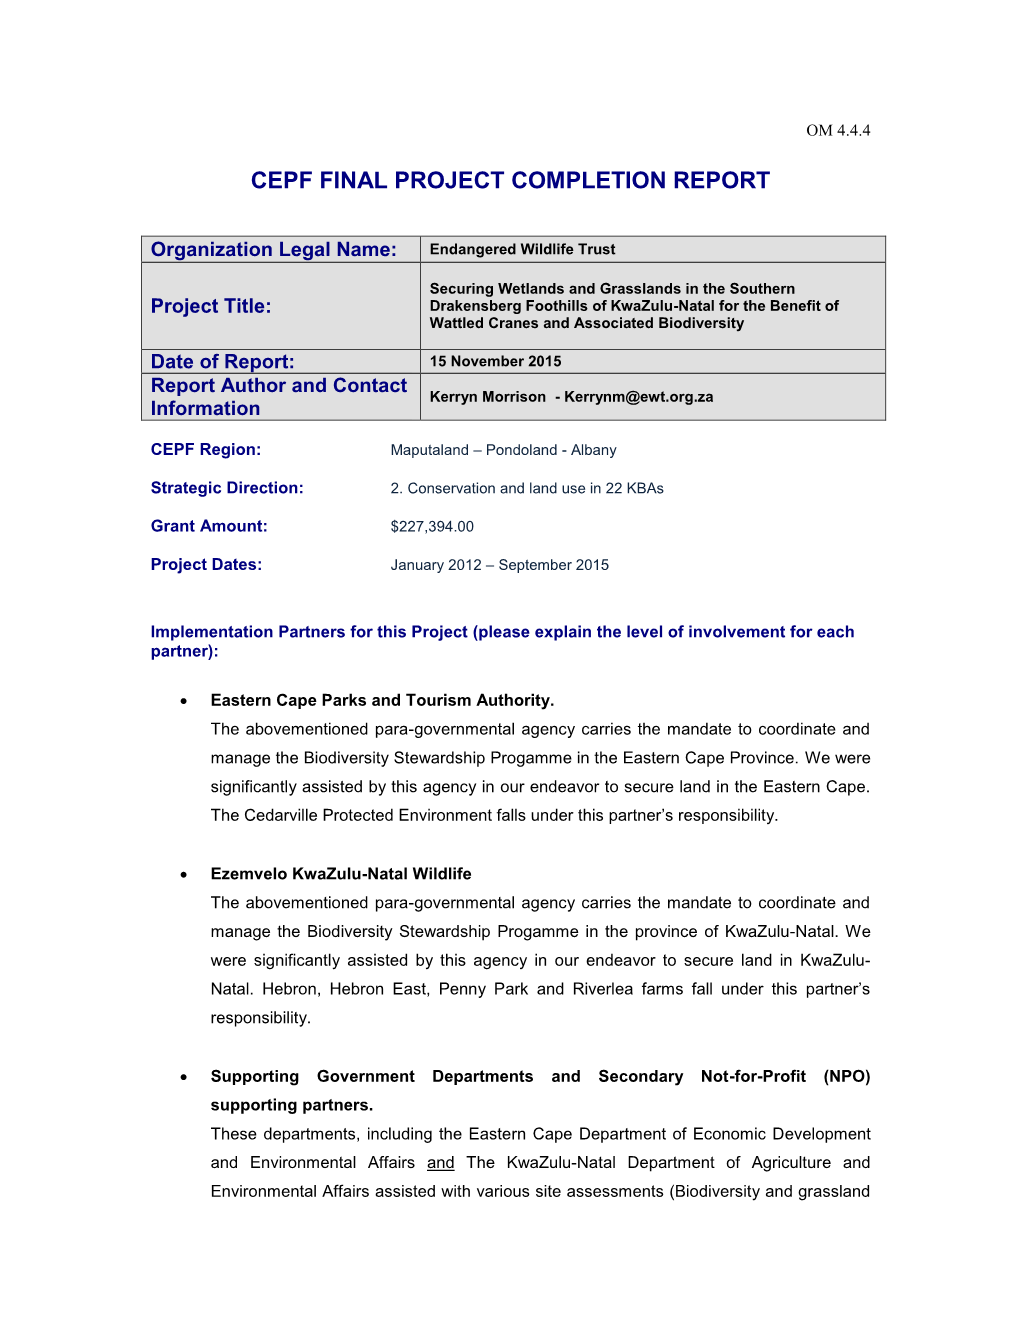 Final Project Completion Report